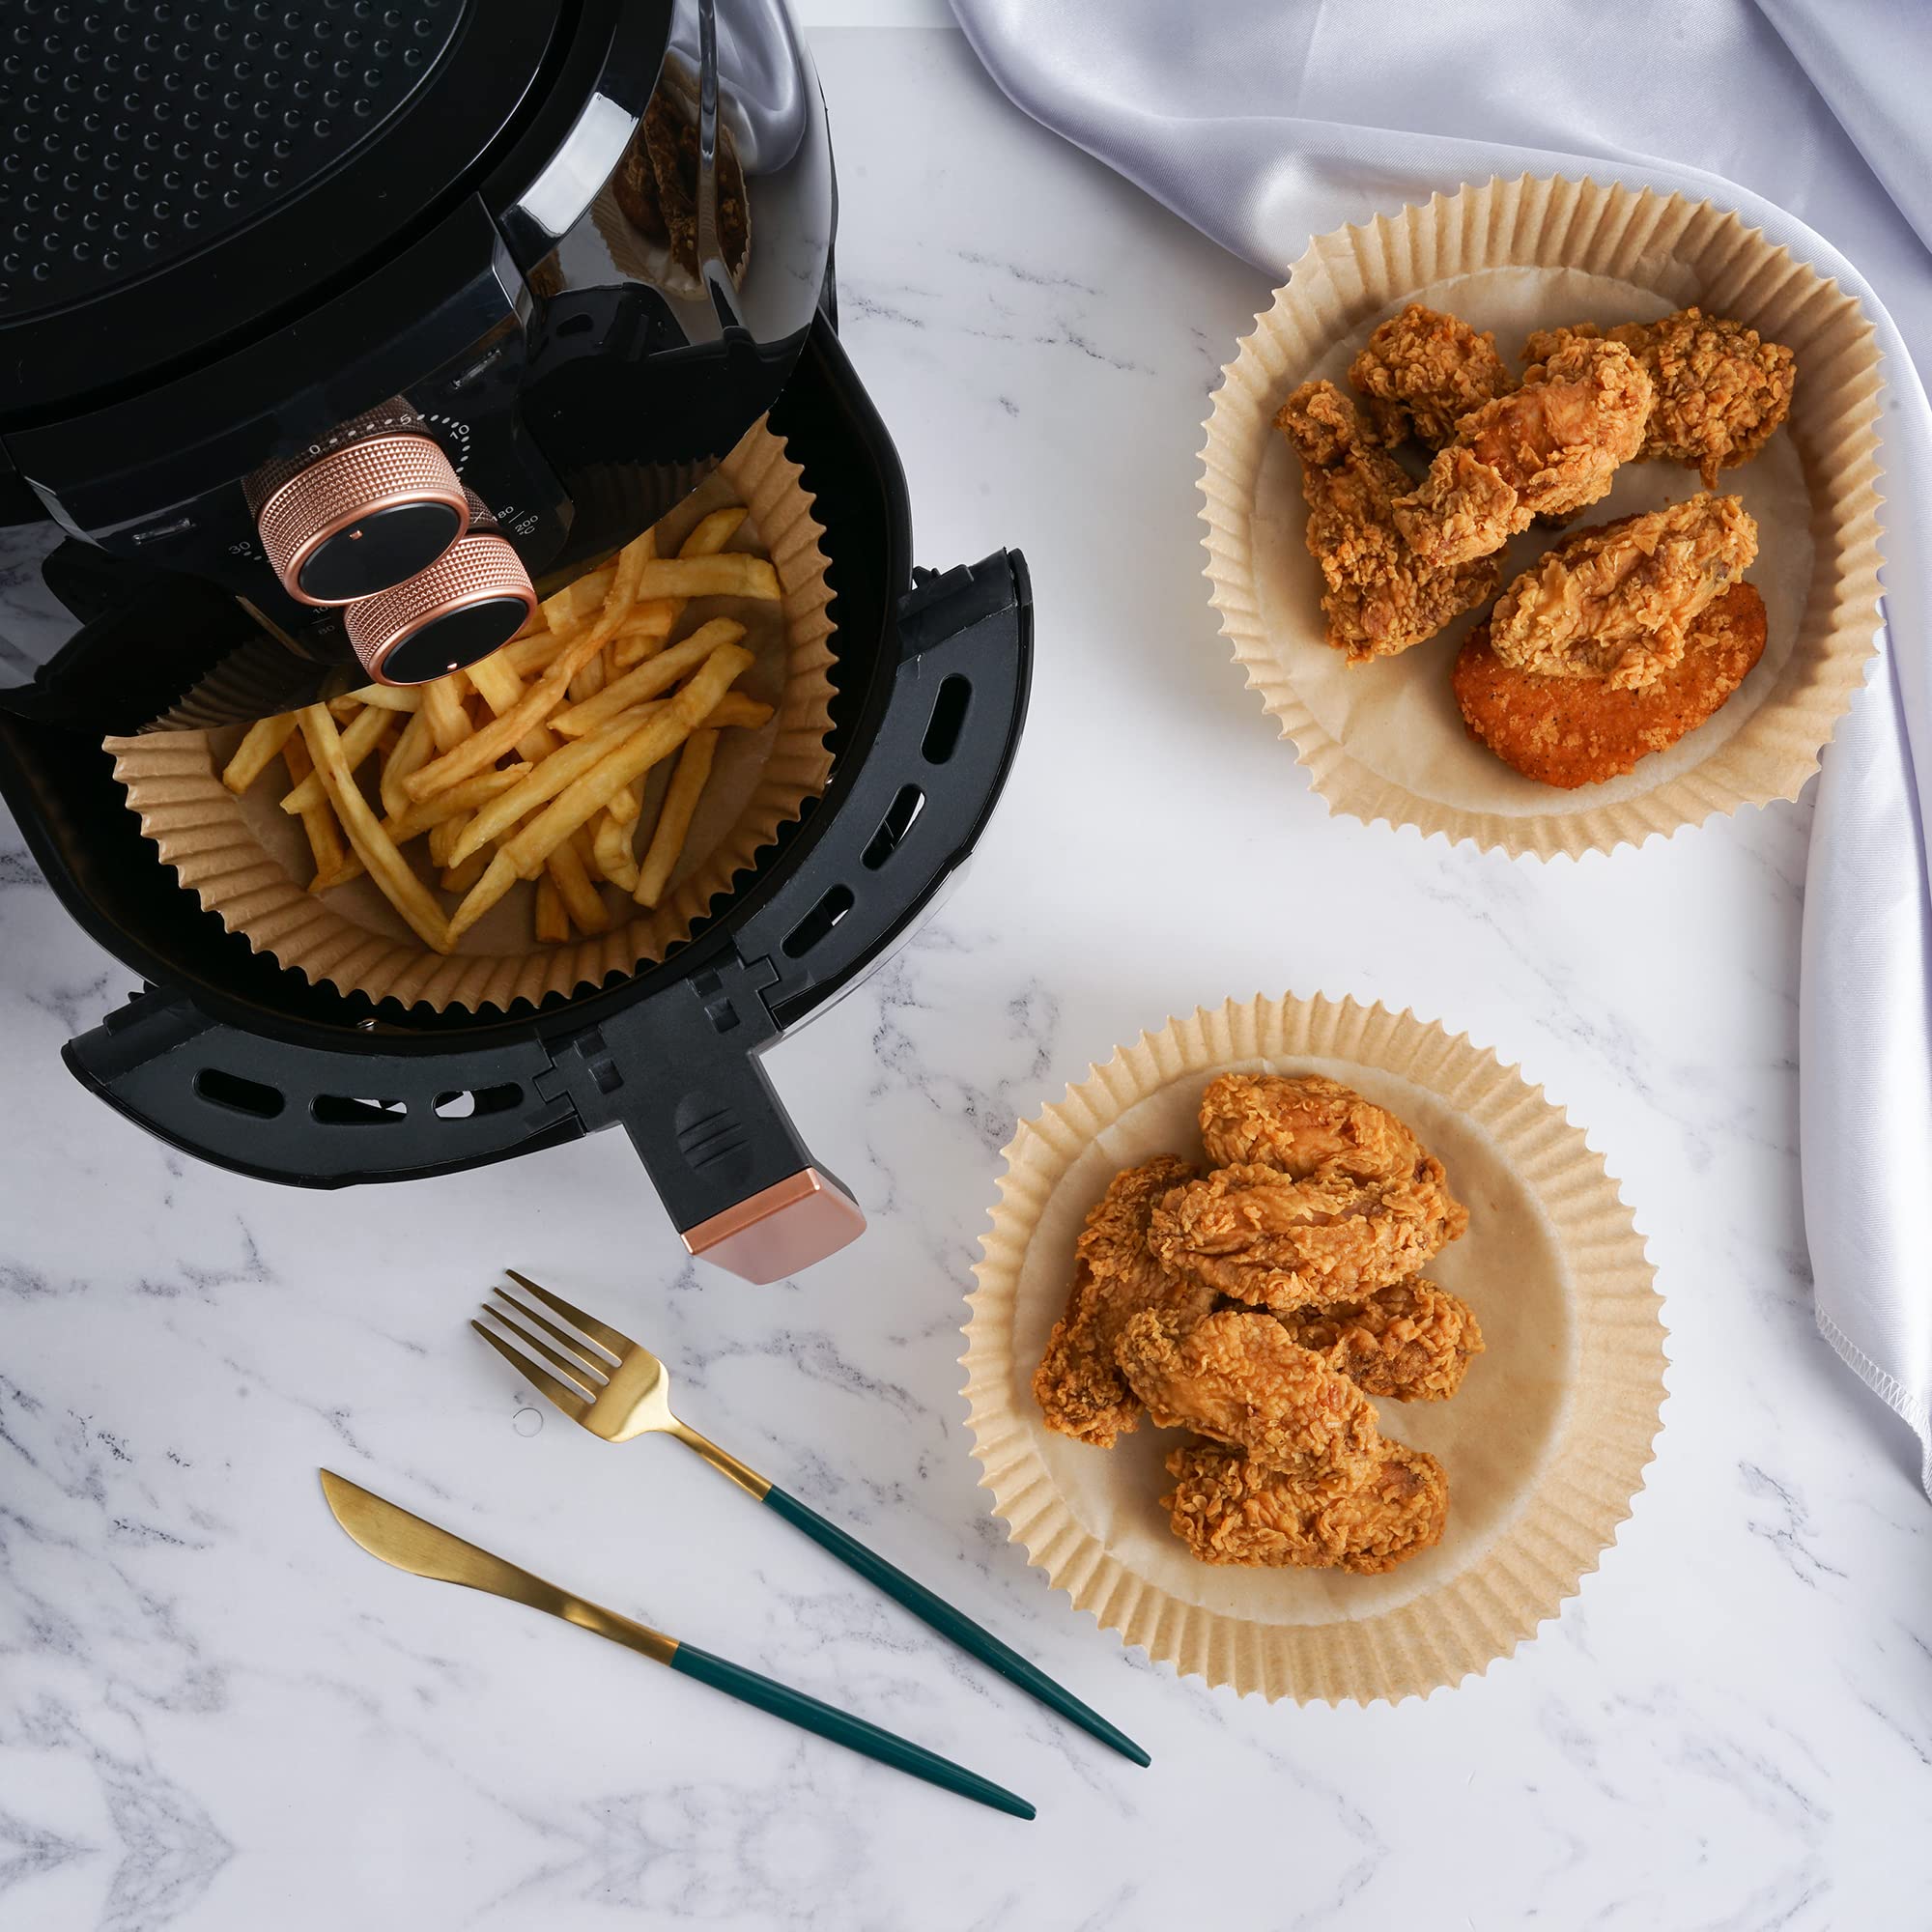 Air Fryer Liners 200 PCS Premium Quality disposable, 6.3 inches Round Paper Liners, Non-Stick & Waterproof Basket liner, Food Grade Oil Resistant Liner for Grease-Free Frying Experience